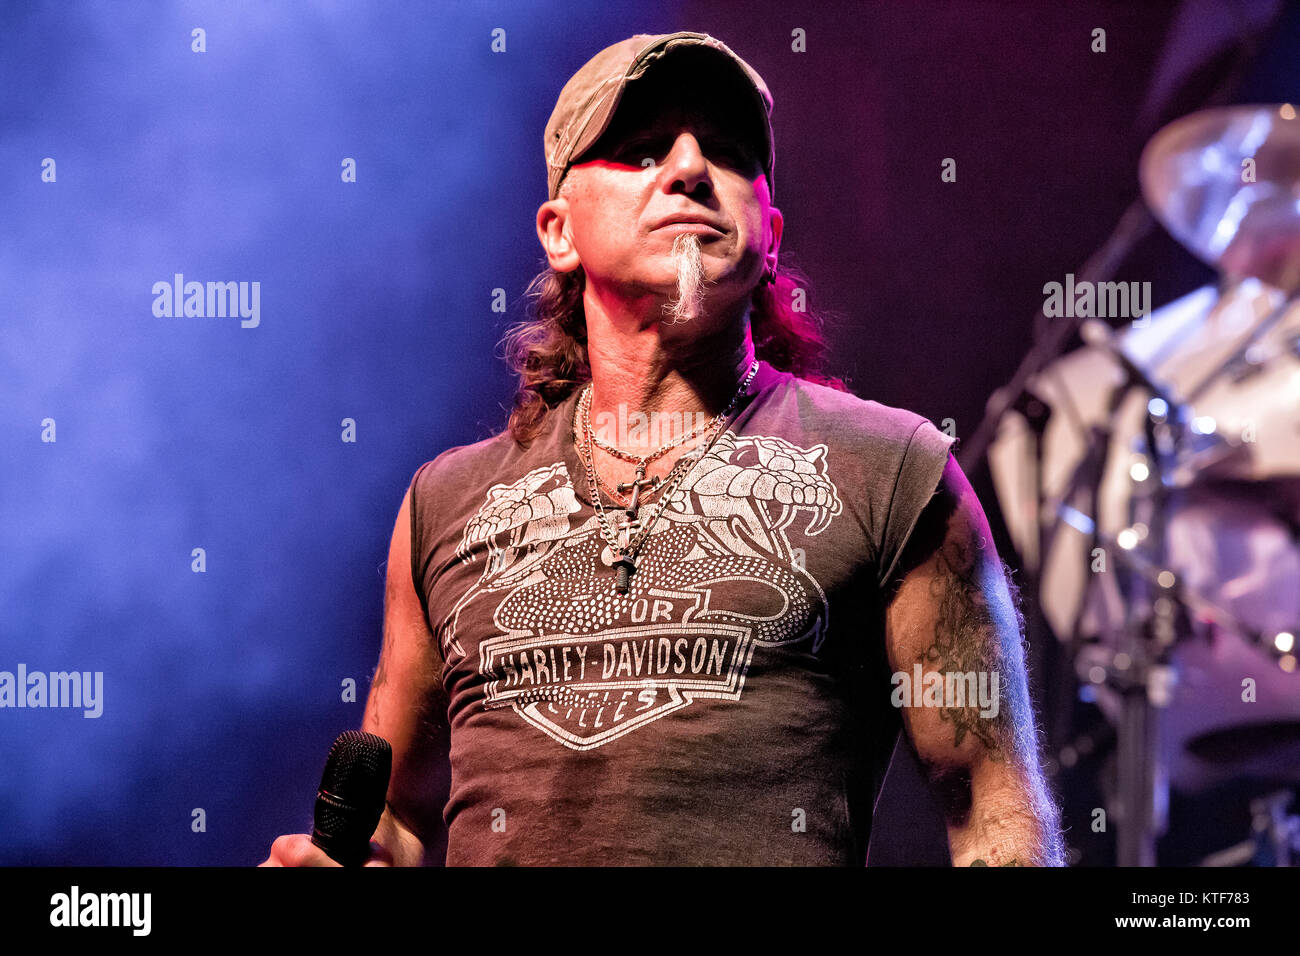 The German heavy metal band Accept performs a live concert at Rockefeller in Oslo. Here vocalist Mark Tornillo is seen live on stage. Norway, 31/10 2012. Stock Photo